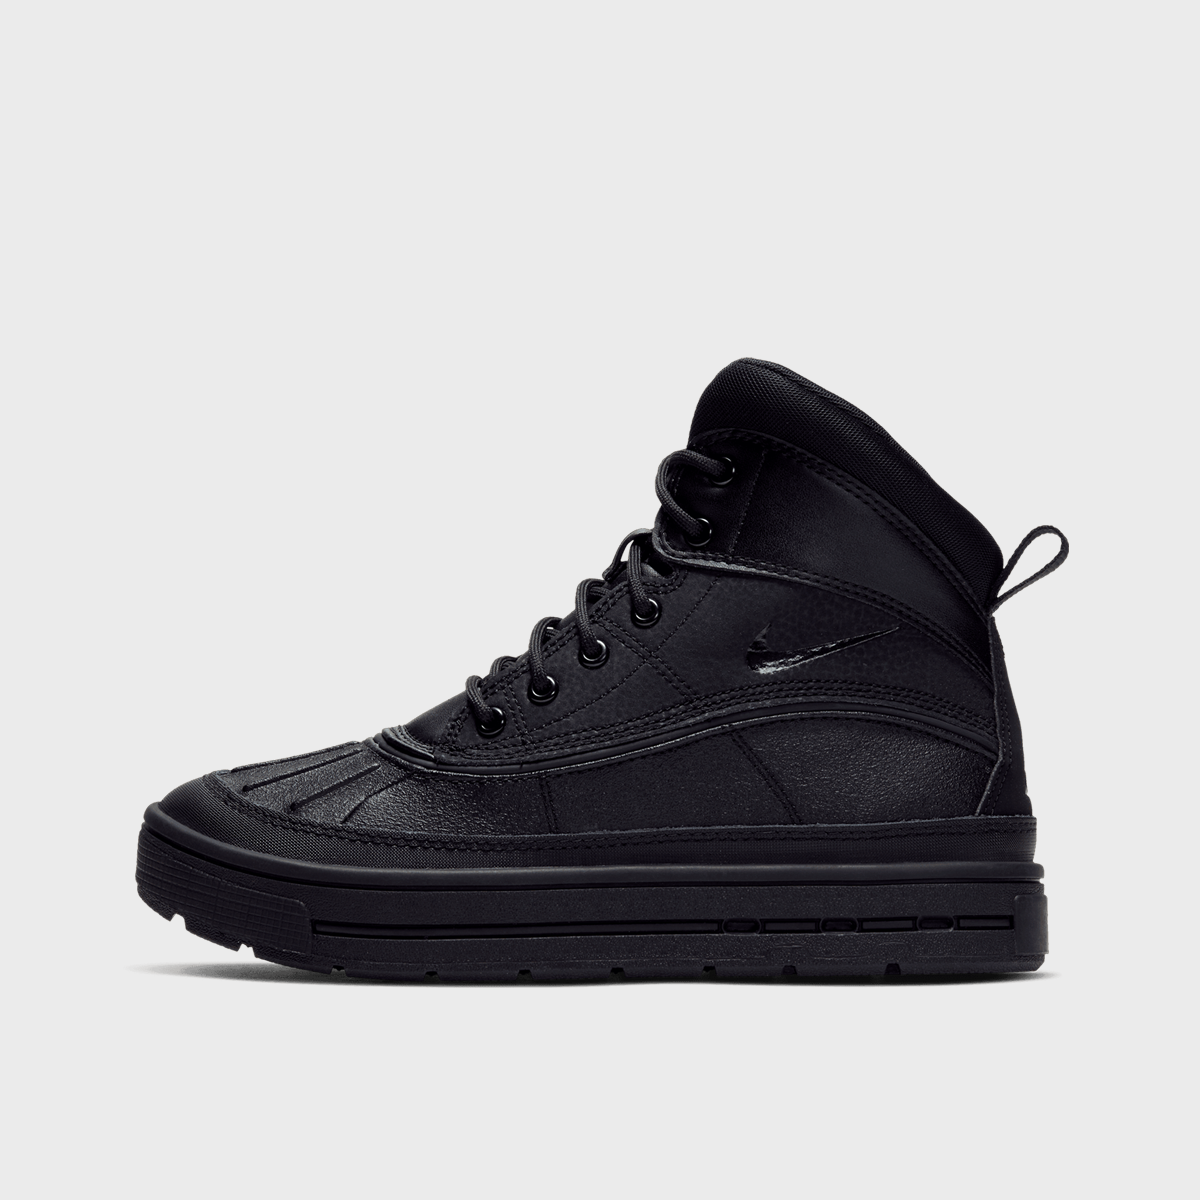 nike woodside 2 high acg boot (gs), bottes, chaussures, black/black/black, taille: 39, tailles disponibles:36,38,39